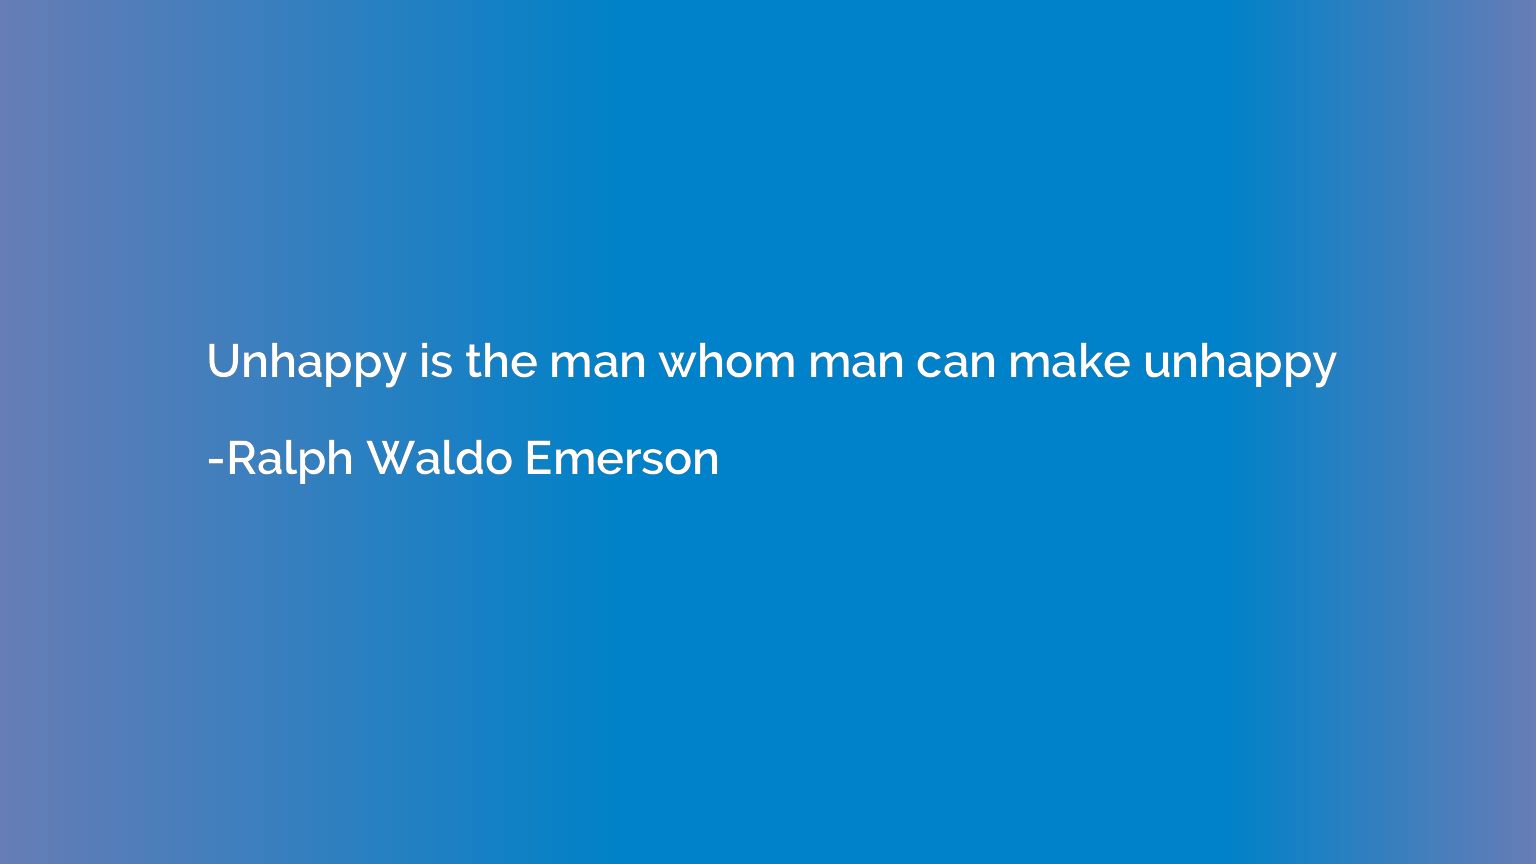 Unhappy is the man whom man can make unhappy